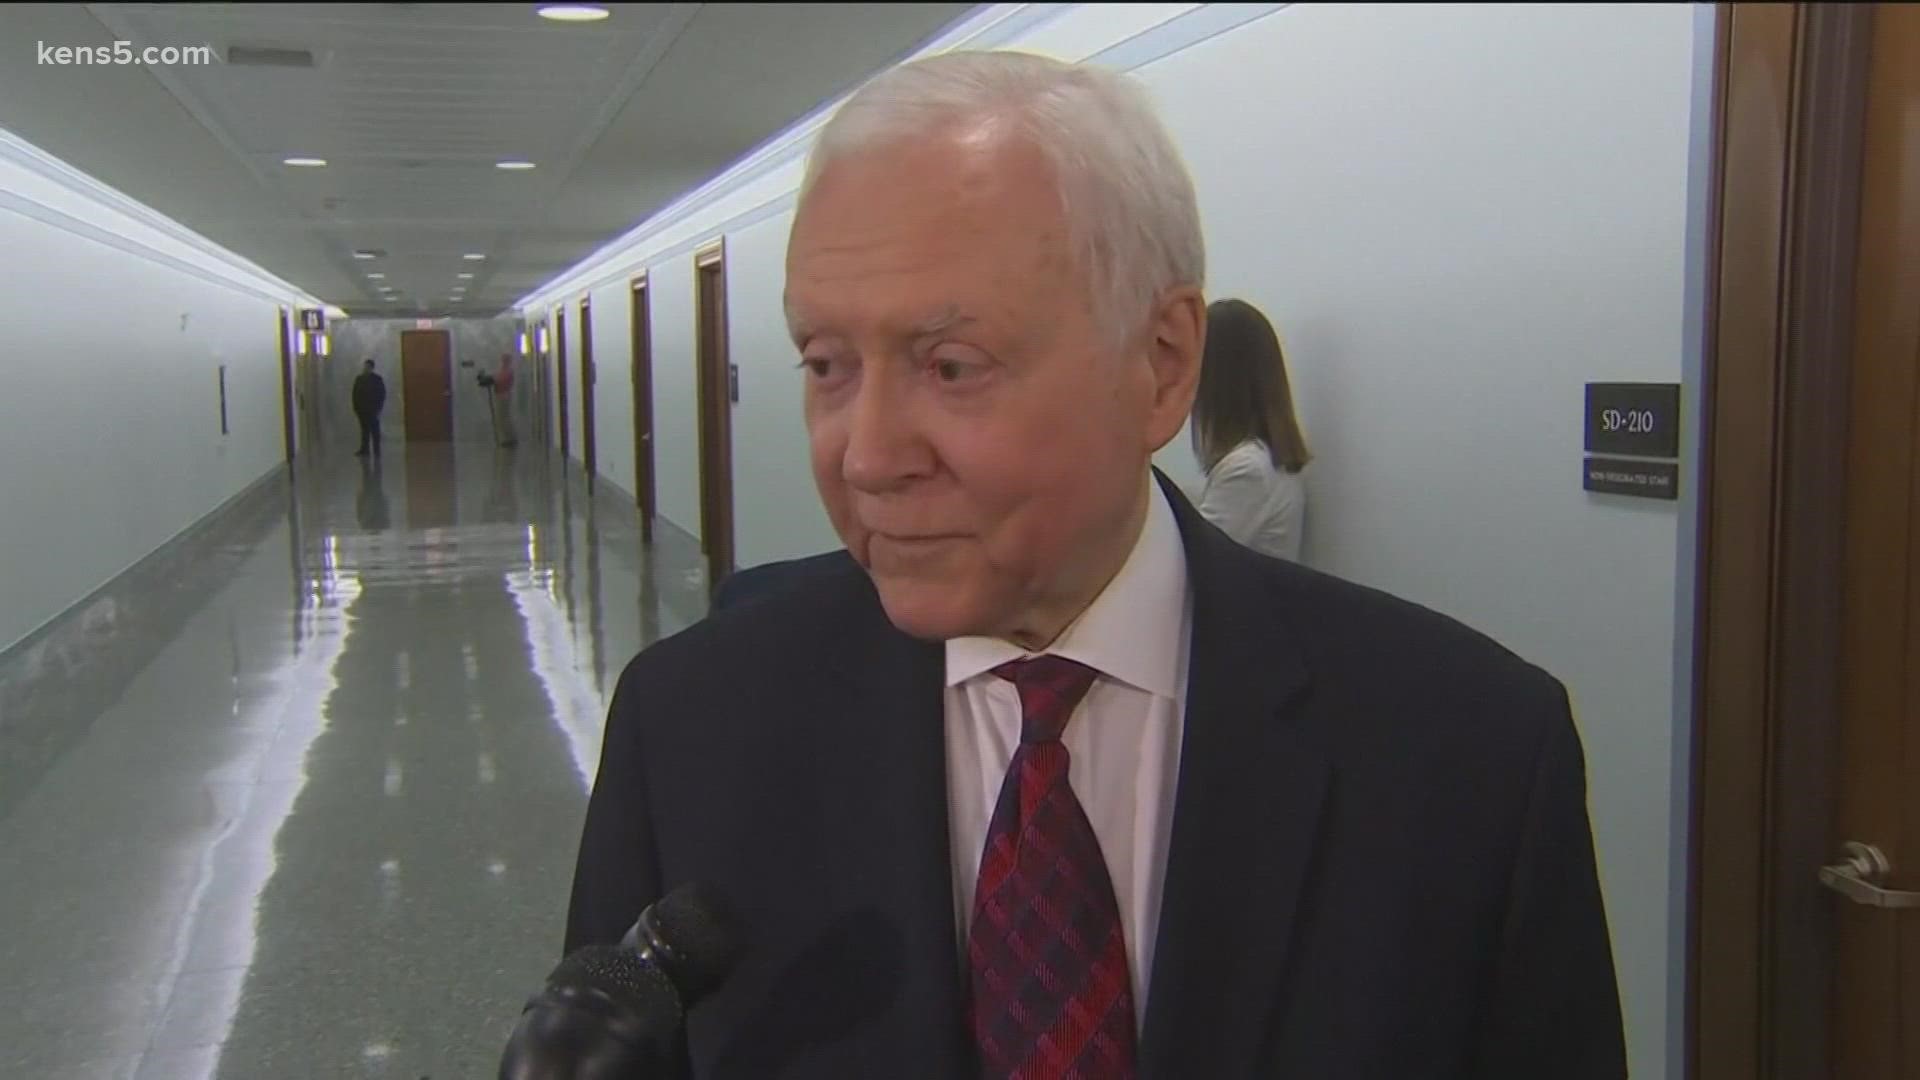 Hatch represented Utah for more than 4 decades.